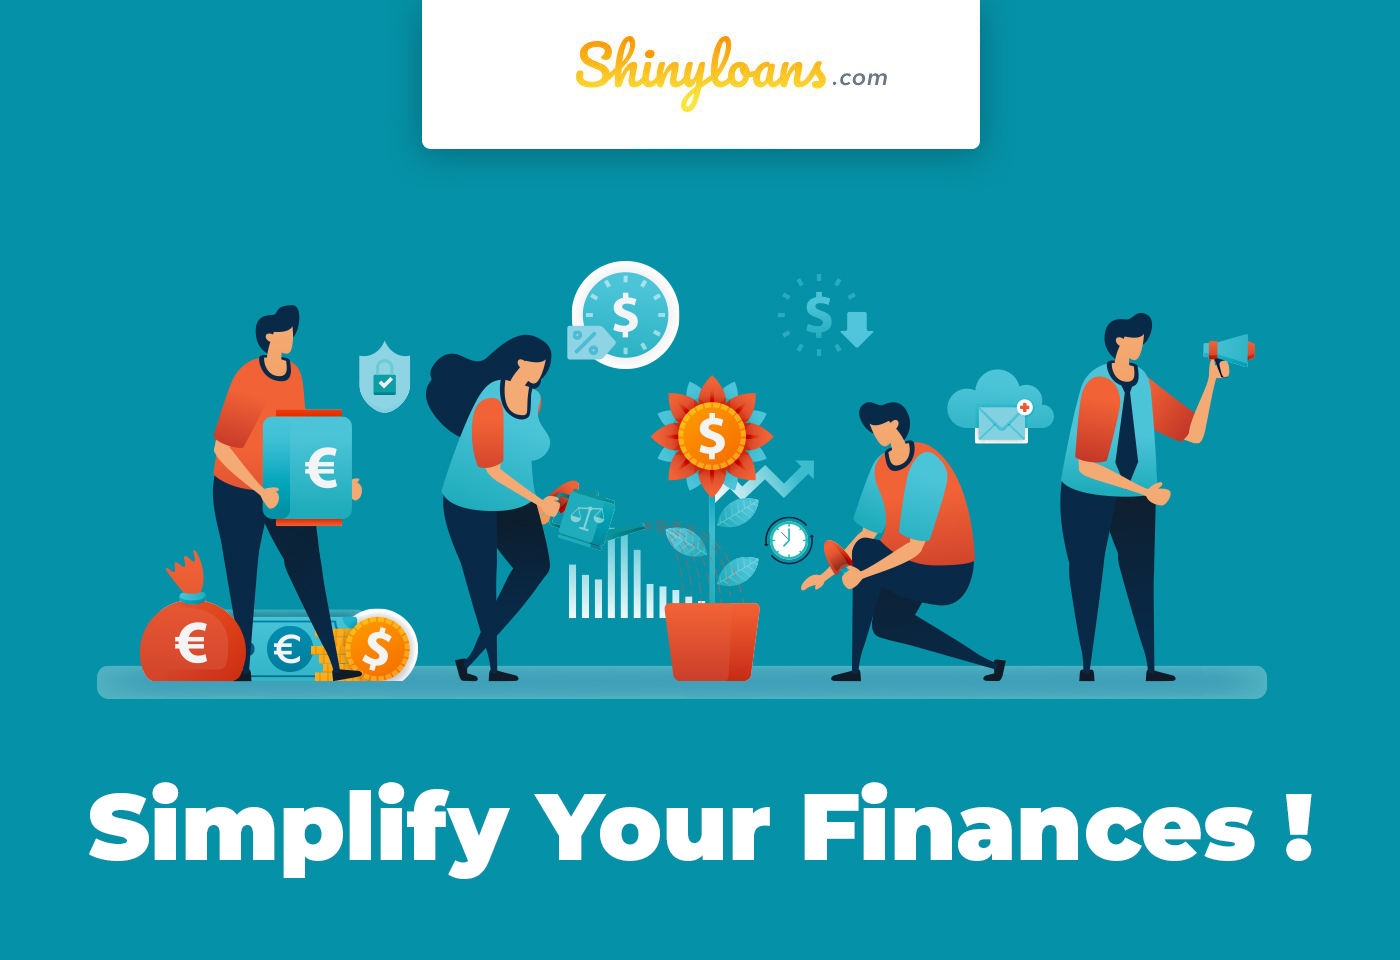 7 Easy Ways to Simplify Your Finances